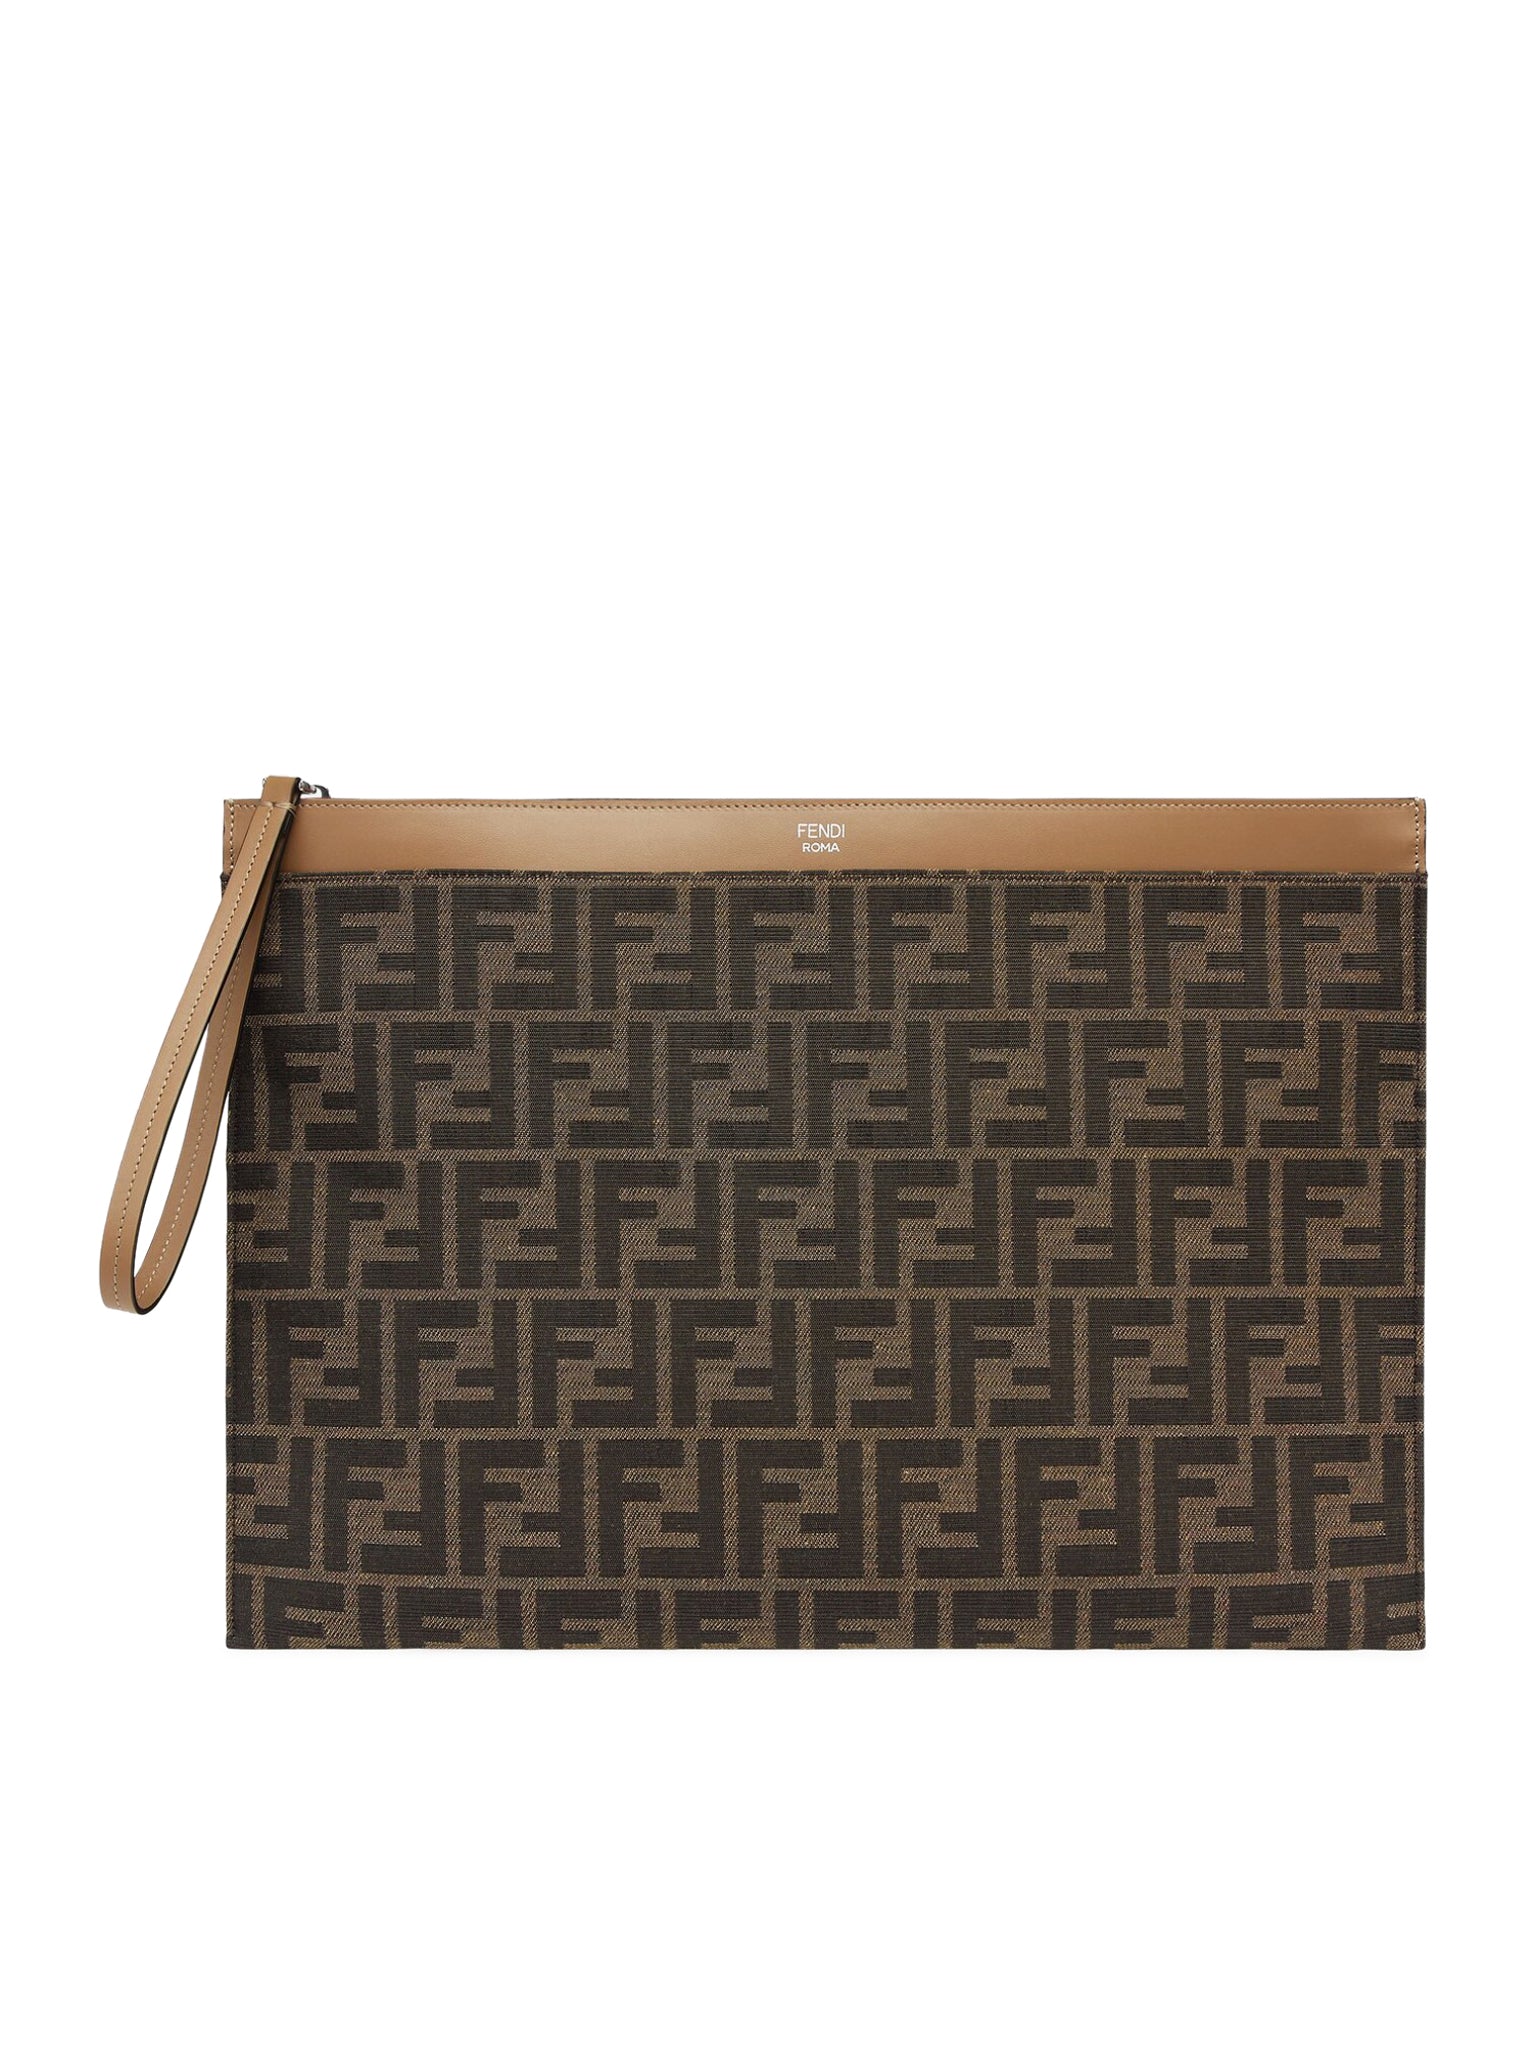 Fendi Large Flat Pouch in Brown